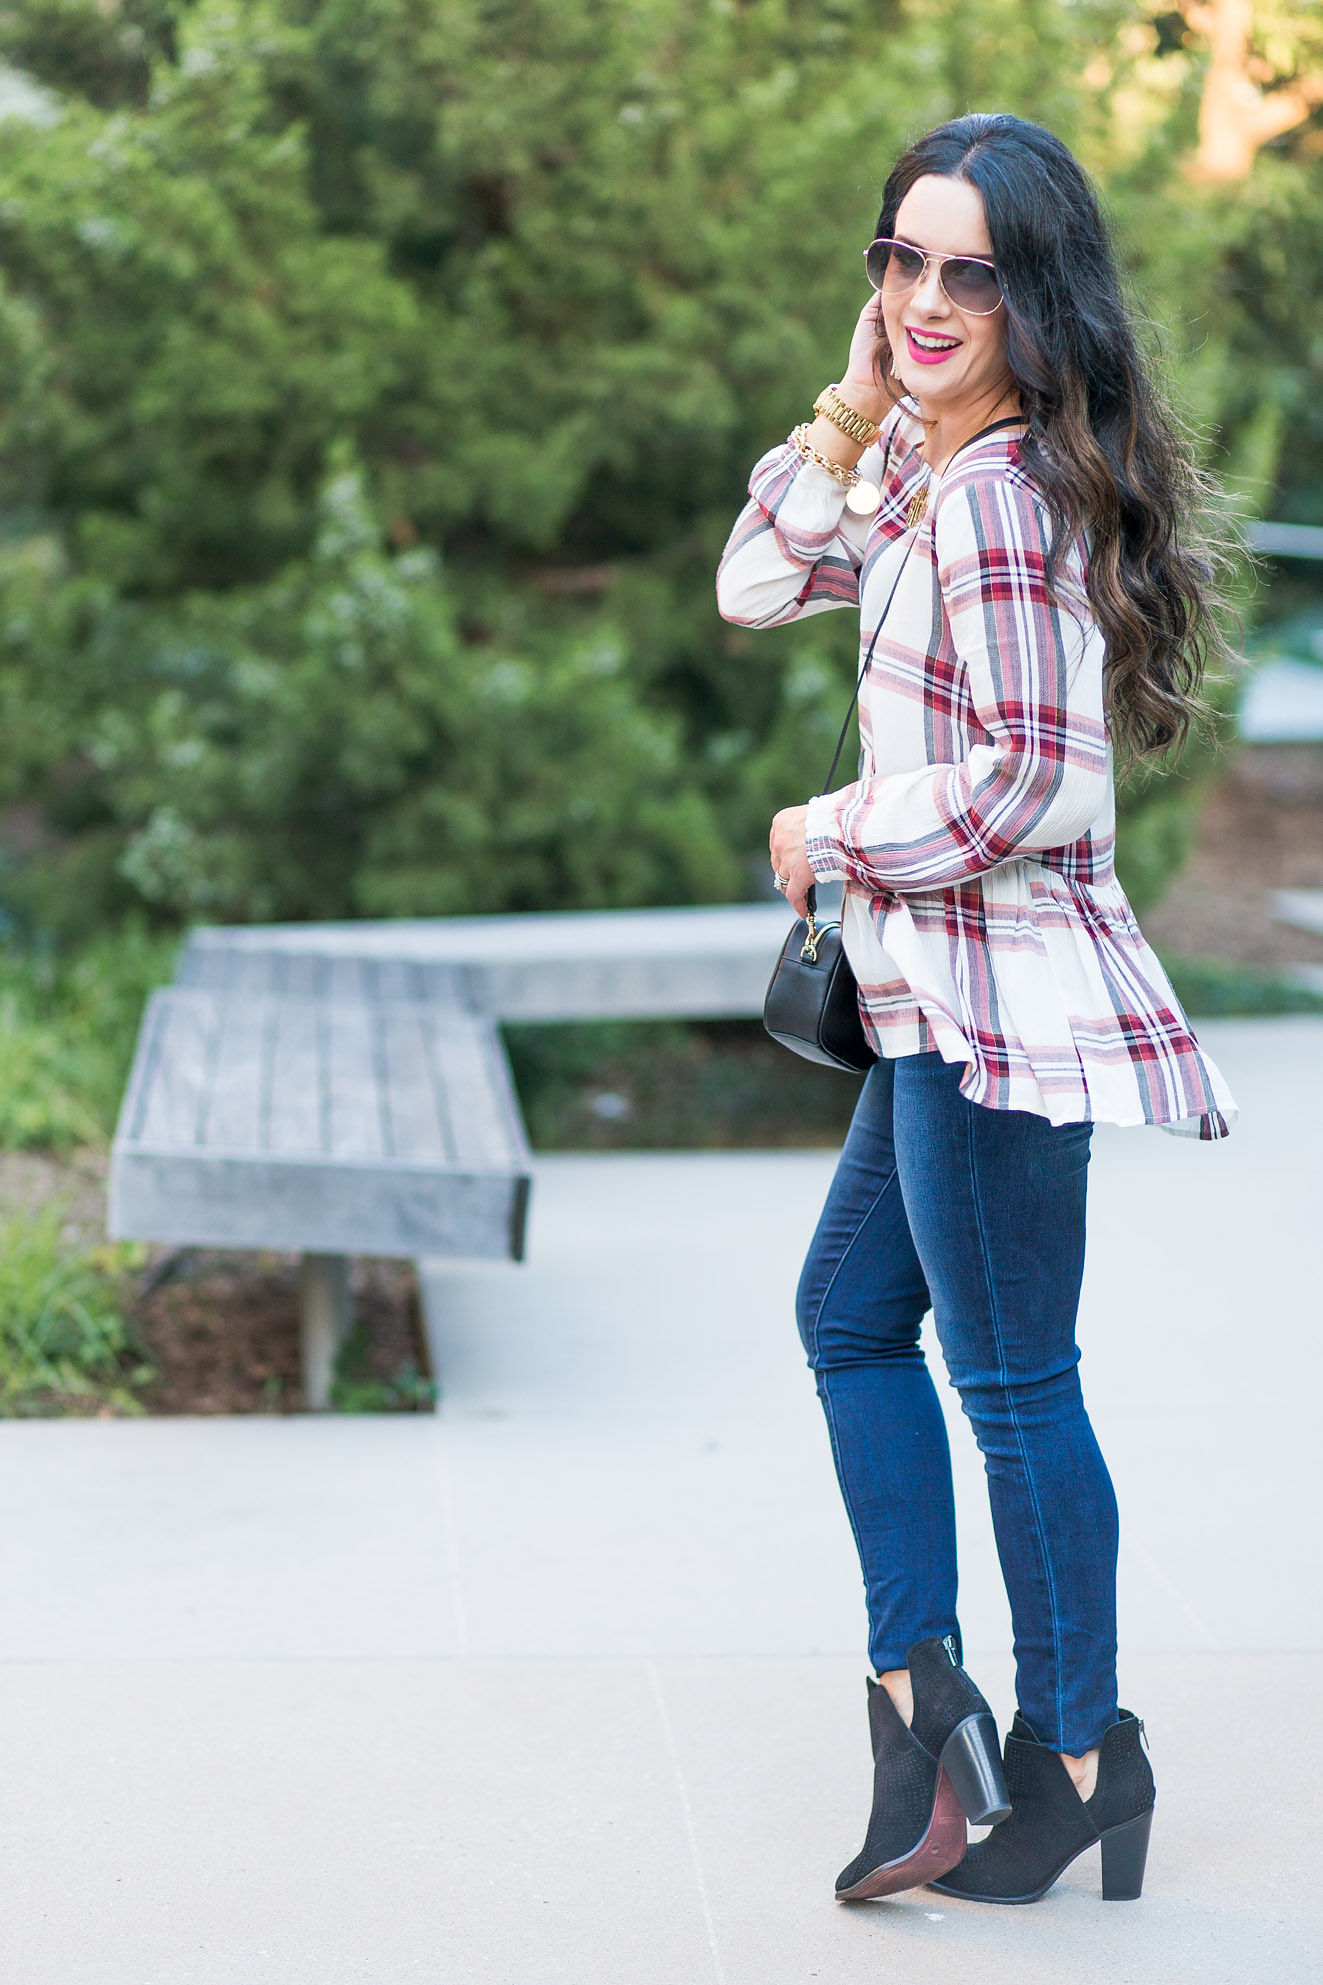 Plaid Peplum Tops + The Double Take Girls October Q&A Part 2